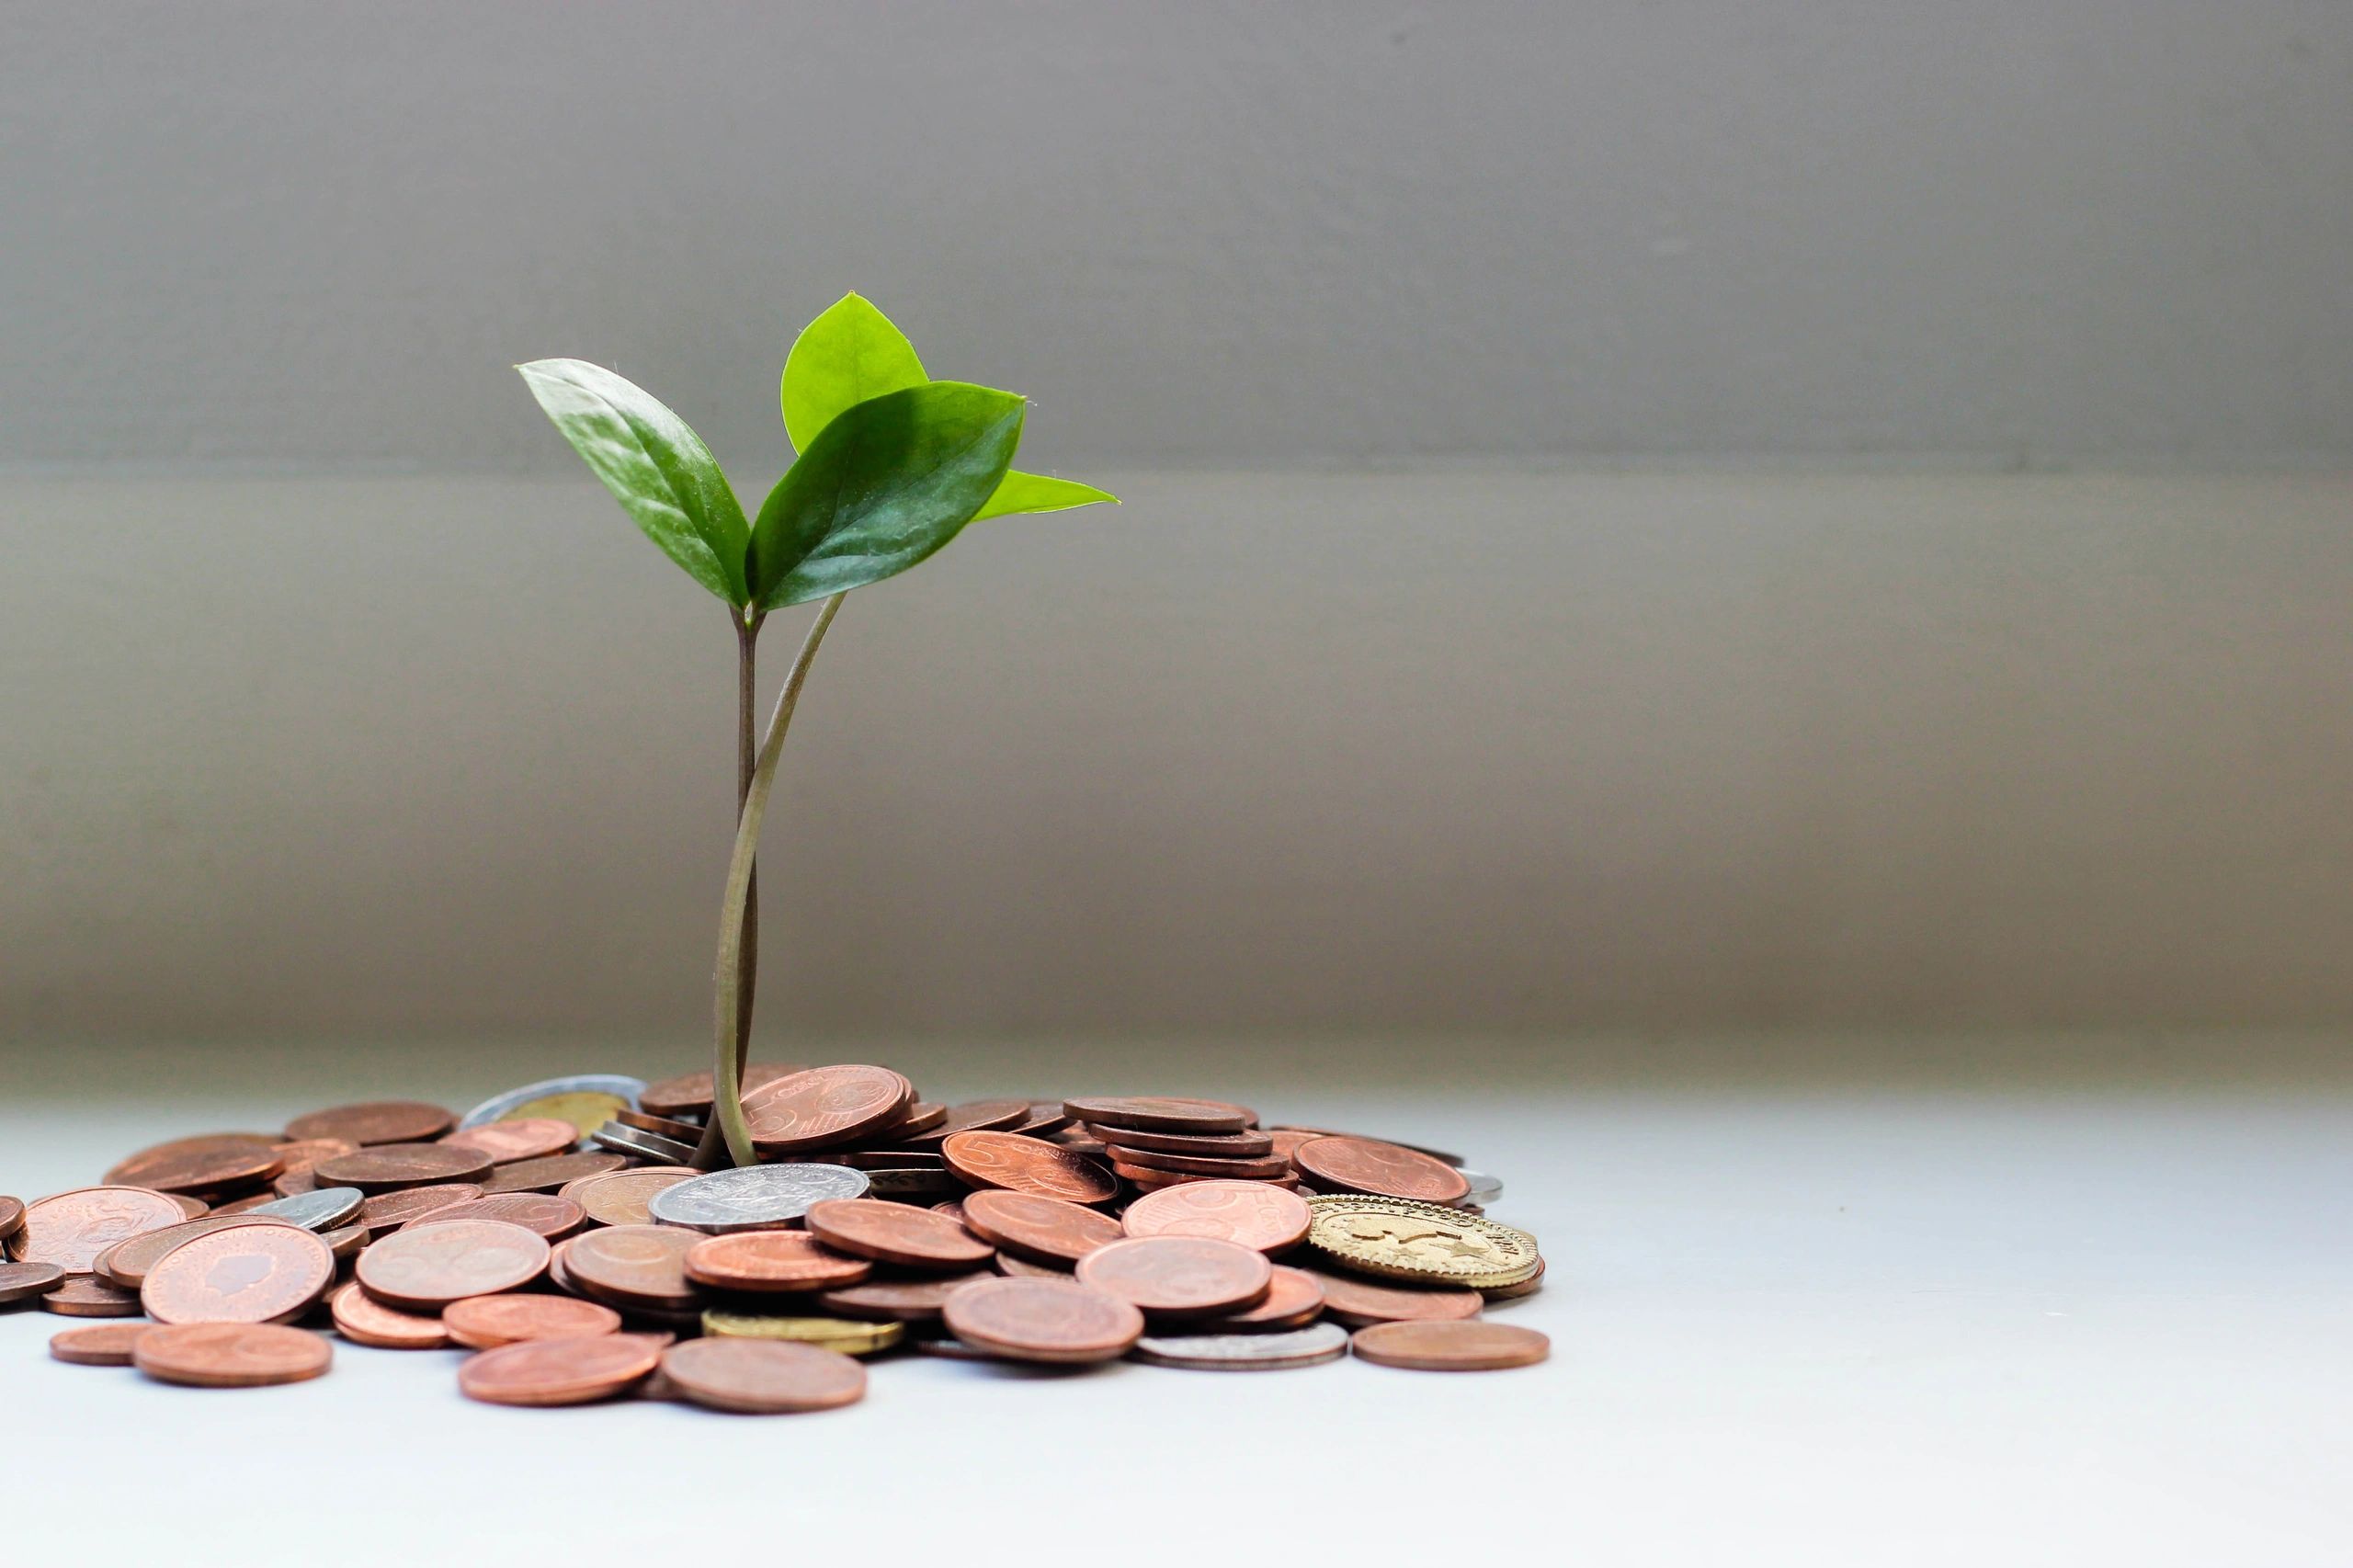 A money tree. A pile of coins on the ground with a green plant growing out of it.